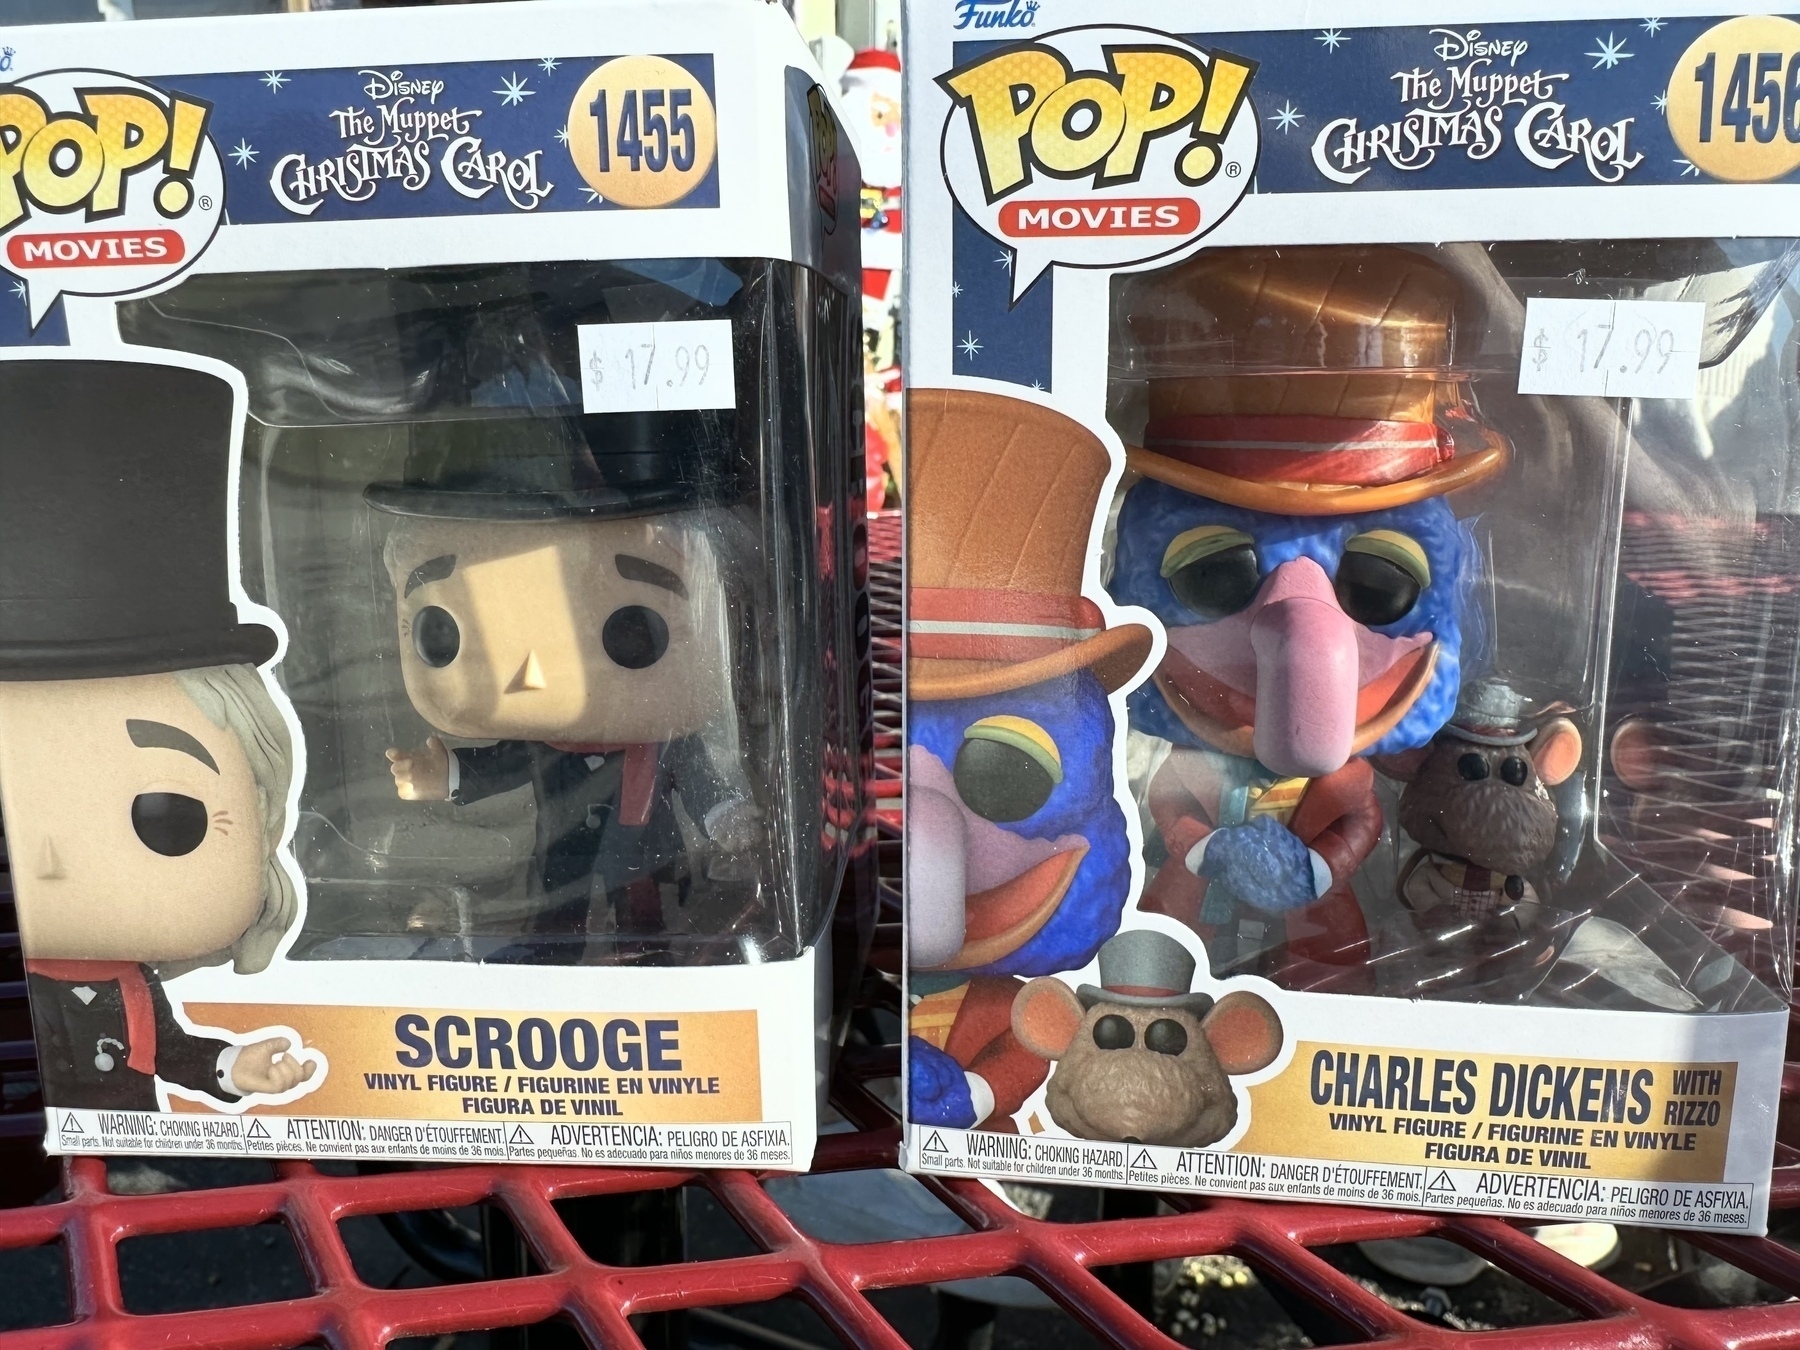 Two Muppet Christmas Carol Funko Pop in boxes, Scrooge and Charles Dickens+Rizzo